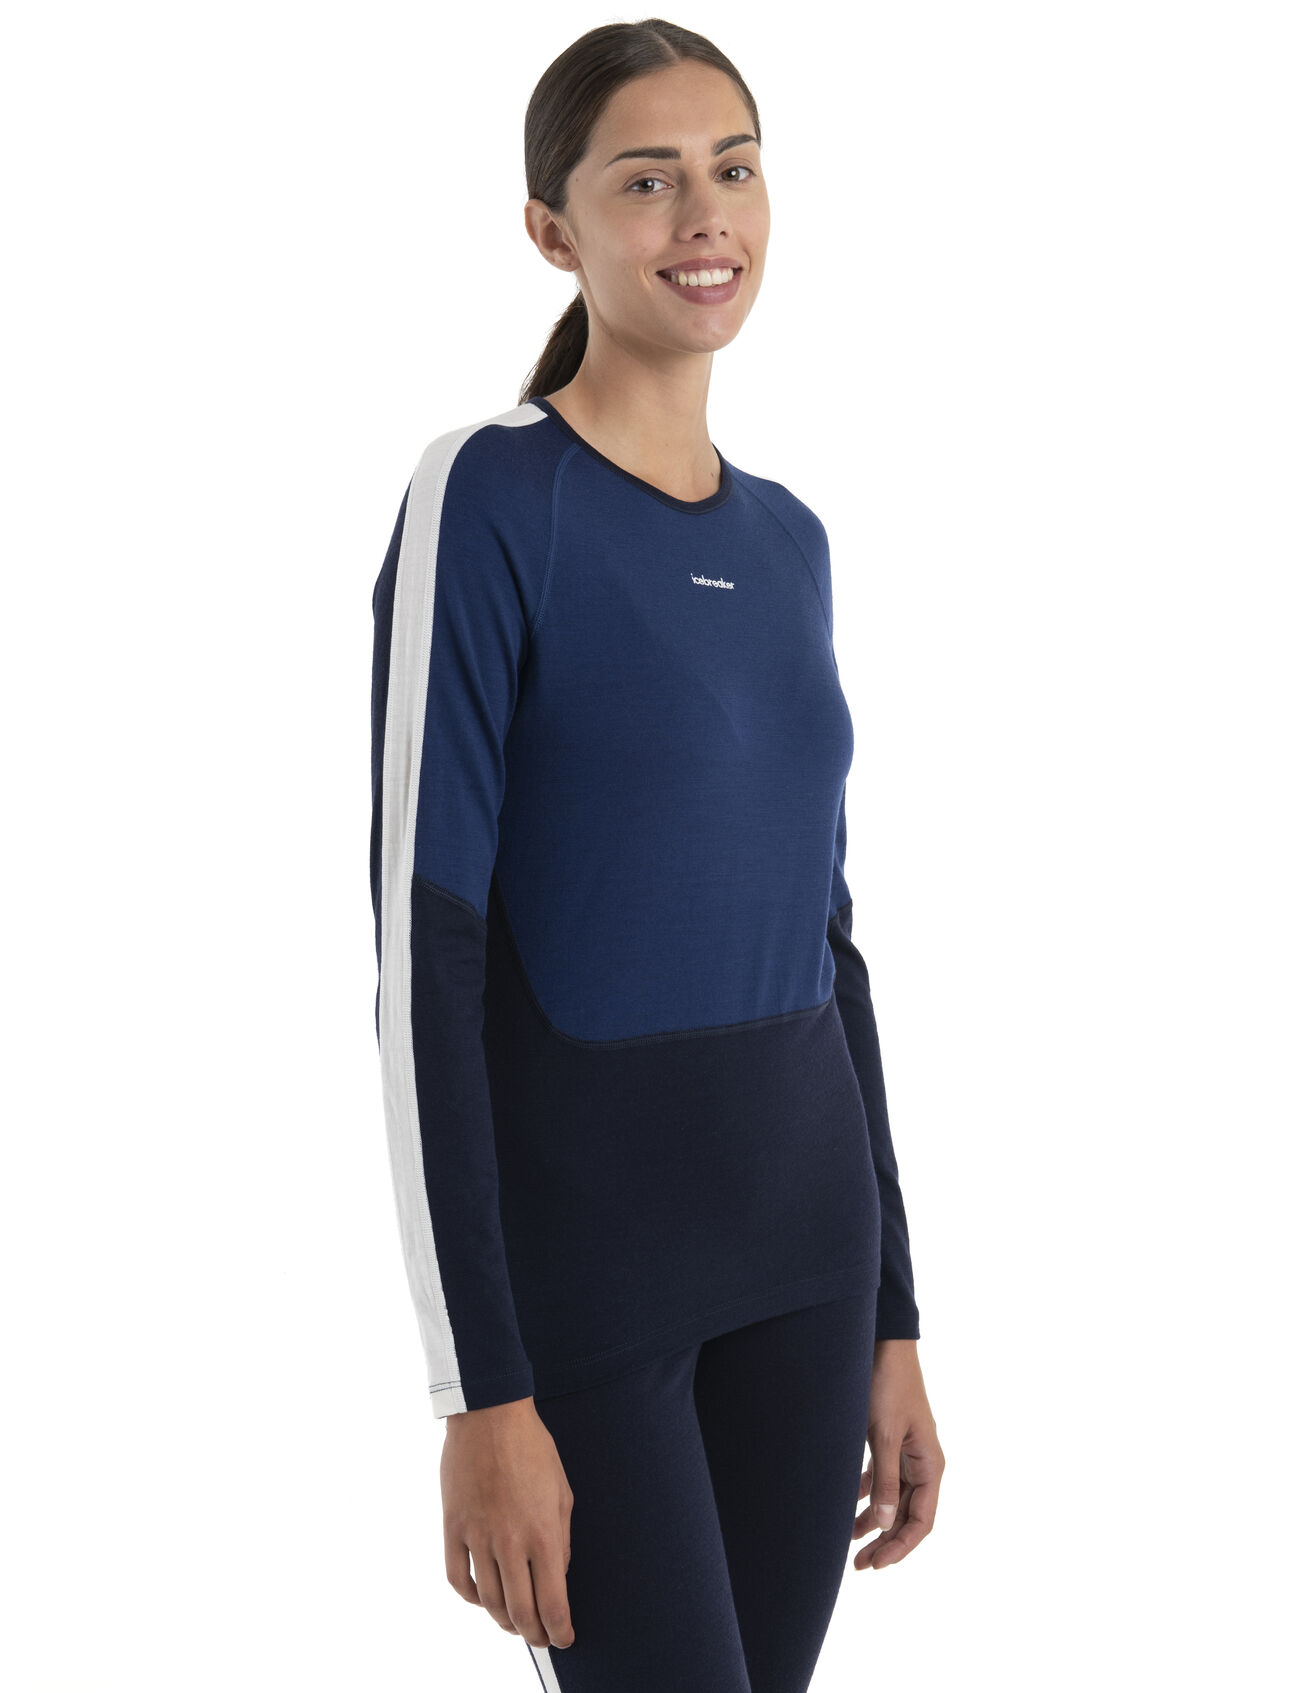 Womens Merino 200 Sonebula Long Sleeve Thermal Top Featuring our most versatile merino jersey fabric, the 200 Sonebula Long Sleeve Crewe is a technical base layer that provides ample warmth whatever the activity.